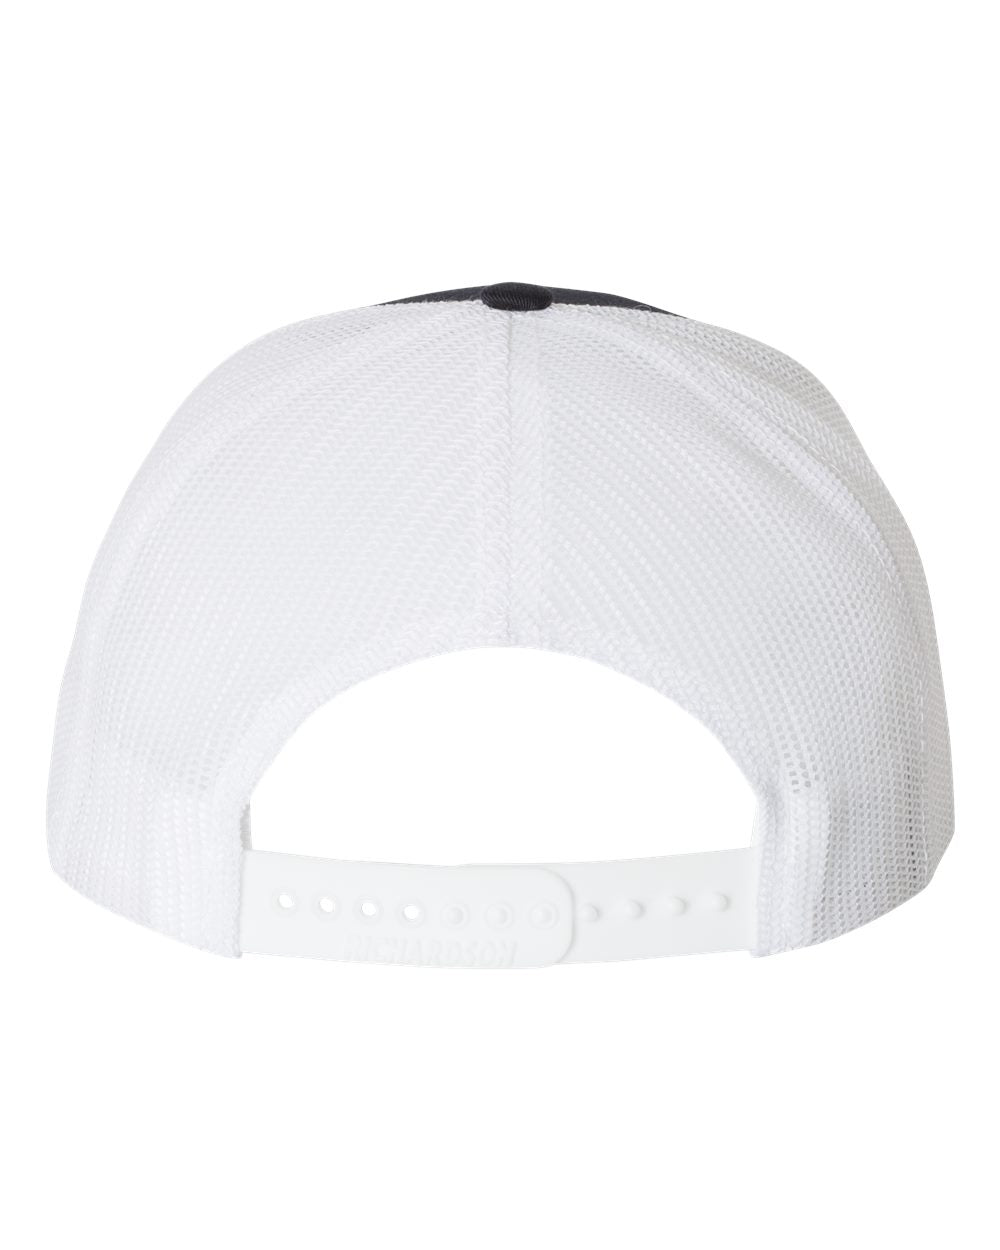 West De Pere Patched Snapback Mid-Profile Trucker Hat - Square White patch